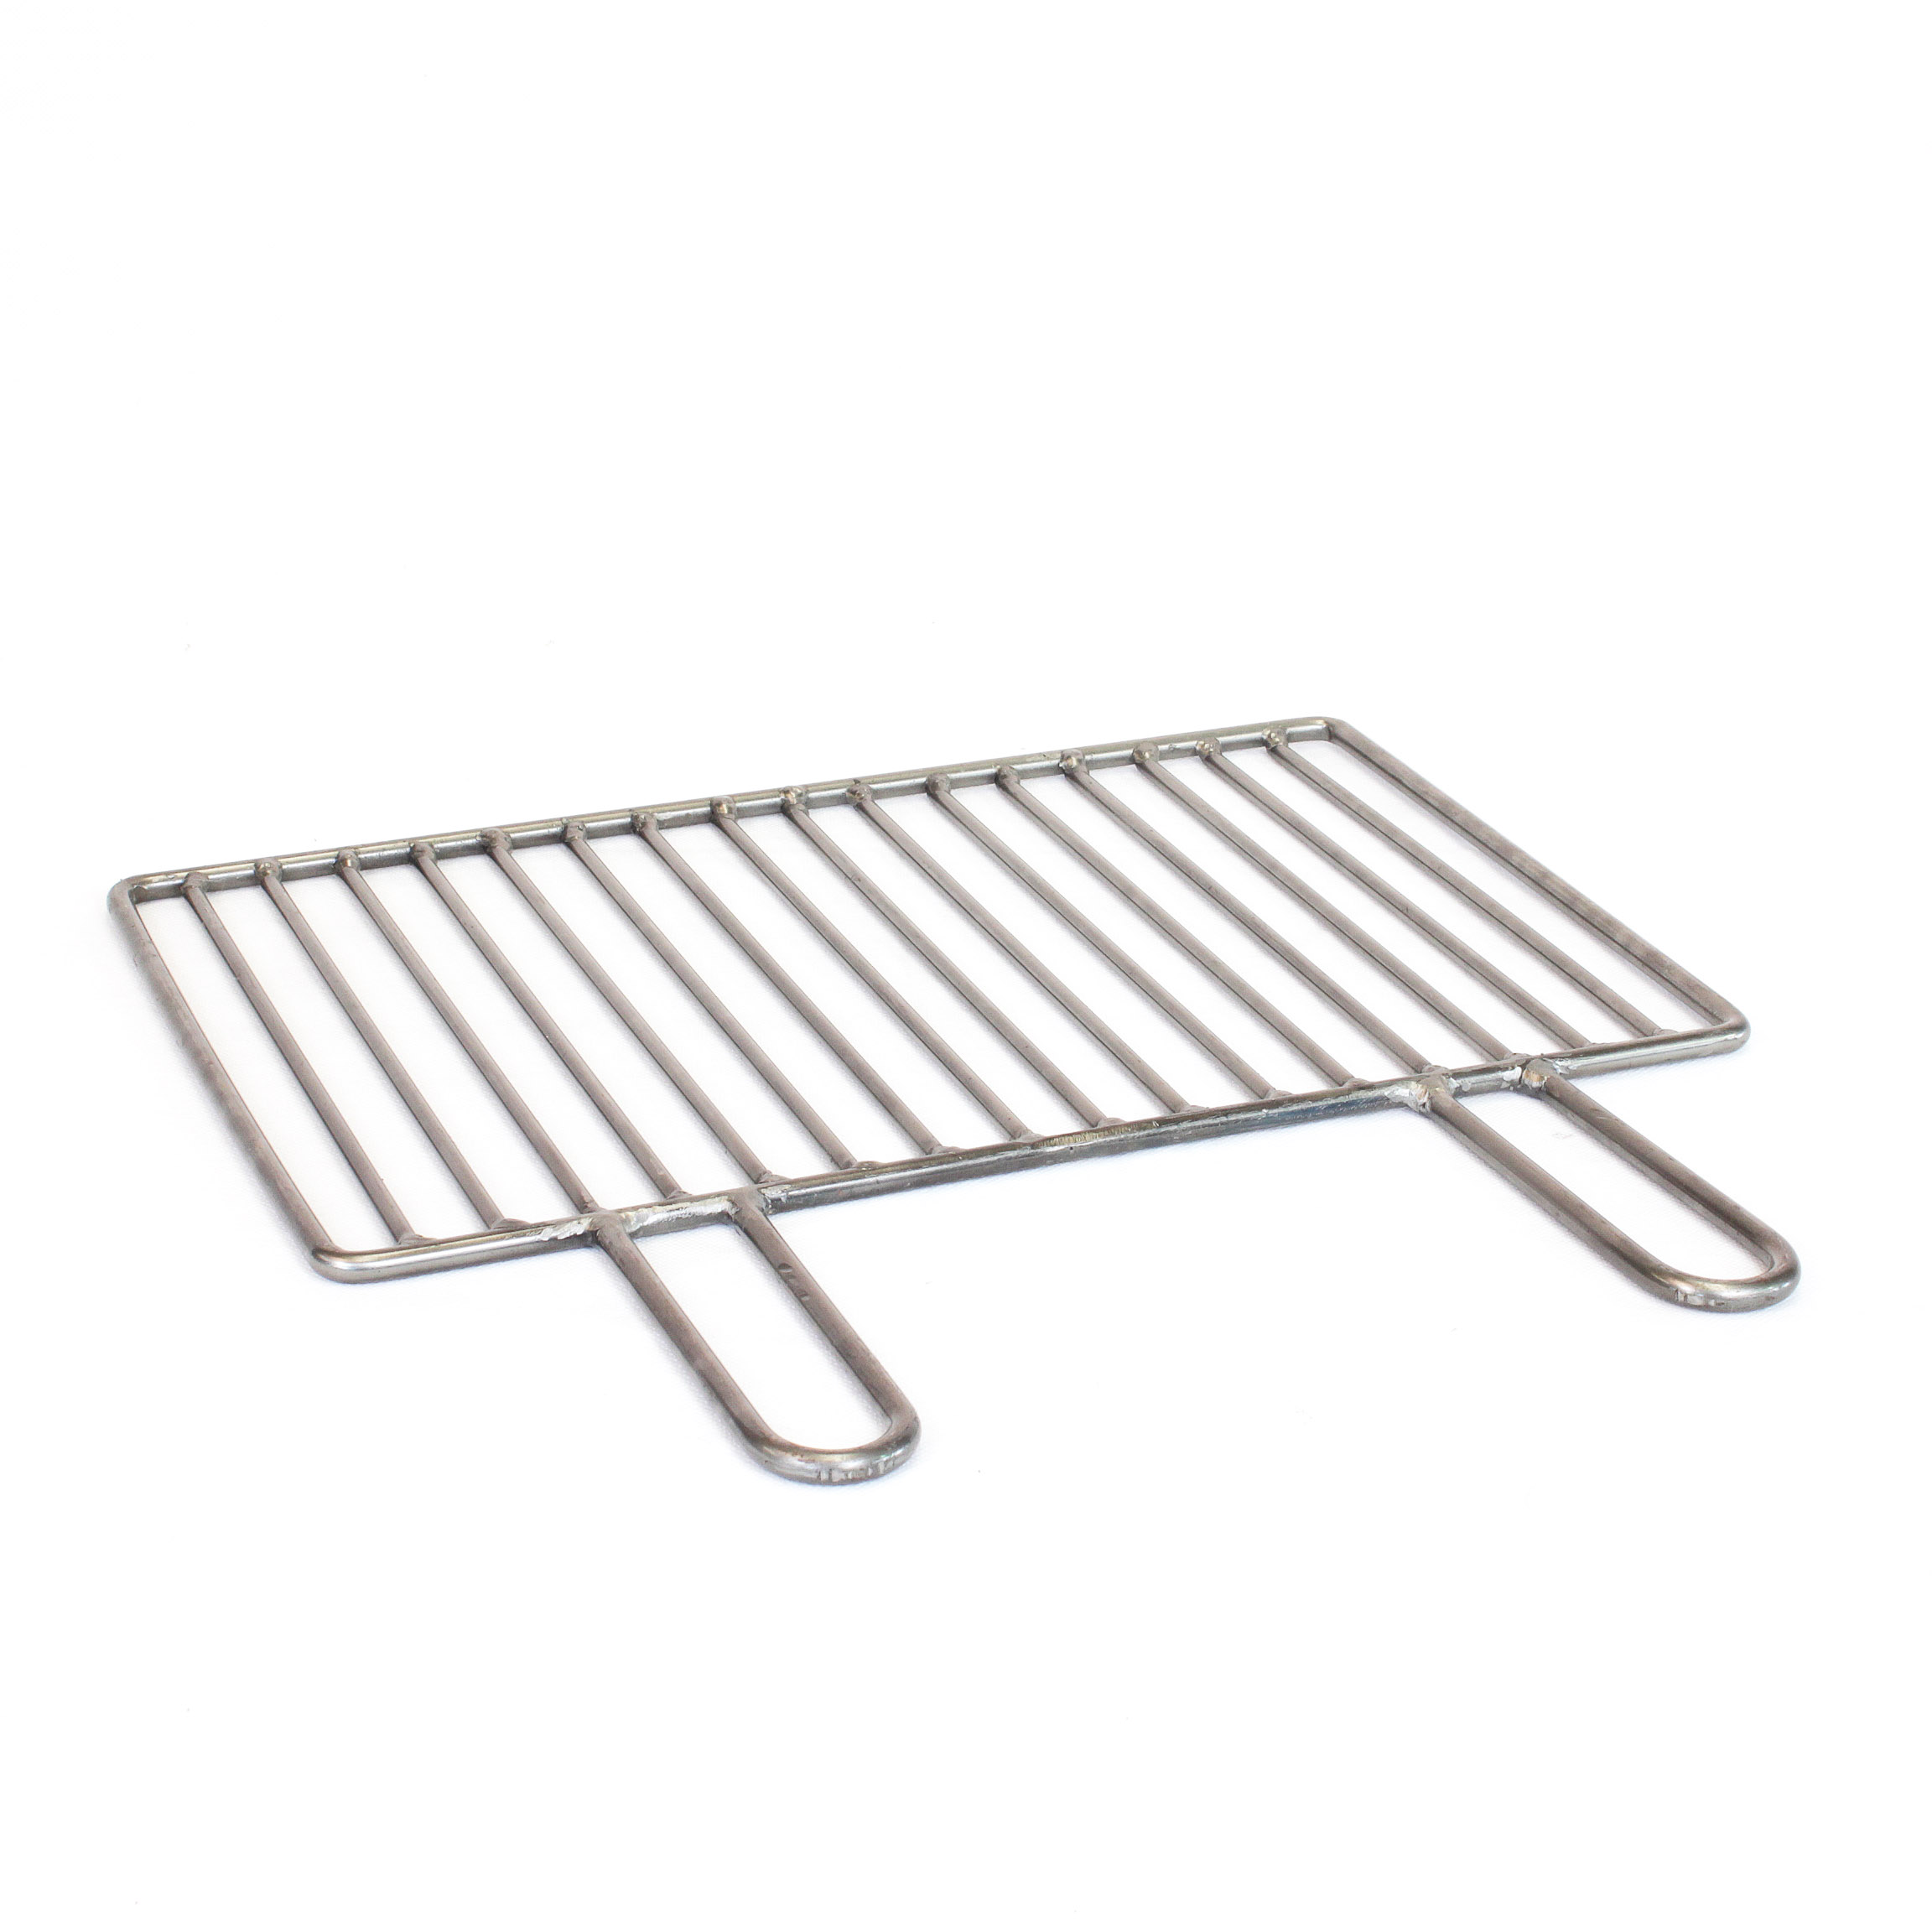 Grille BBQ - 18 Barres - 2 Manches Fer